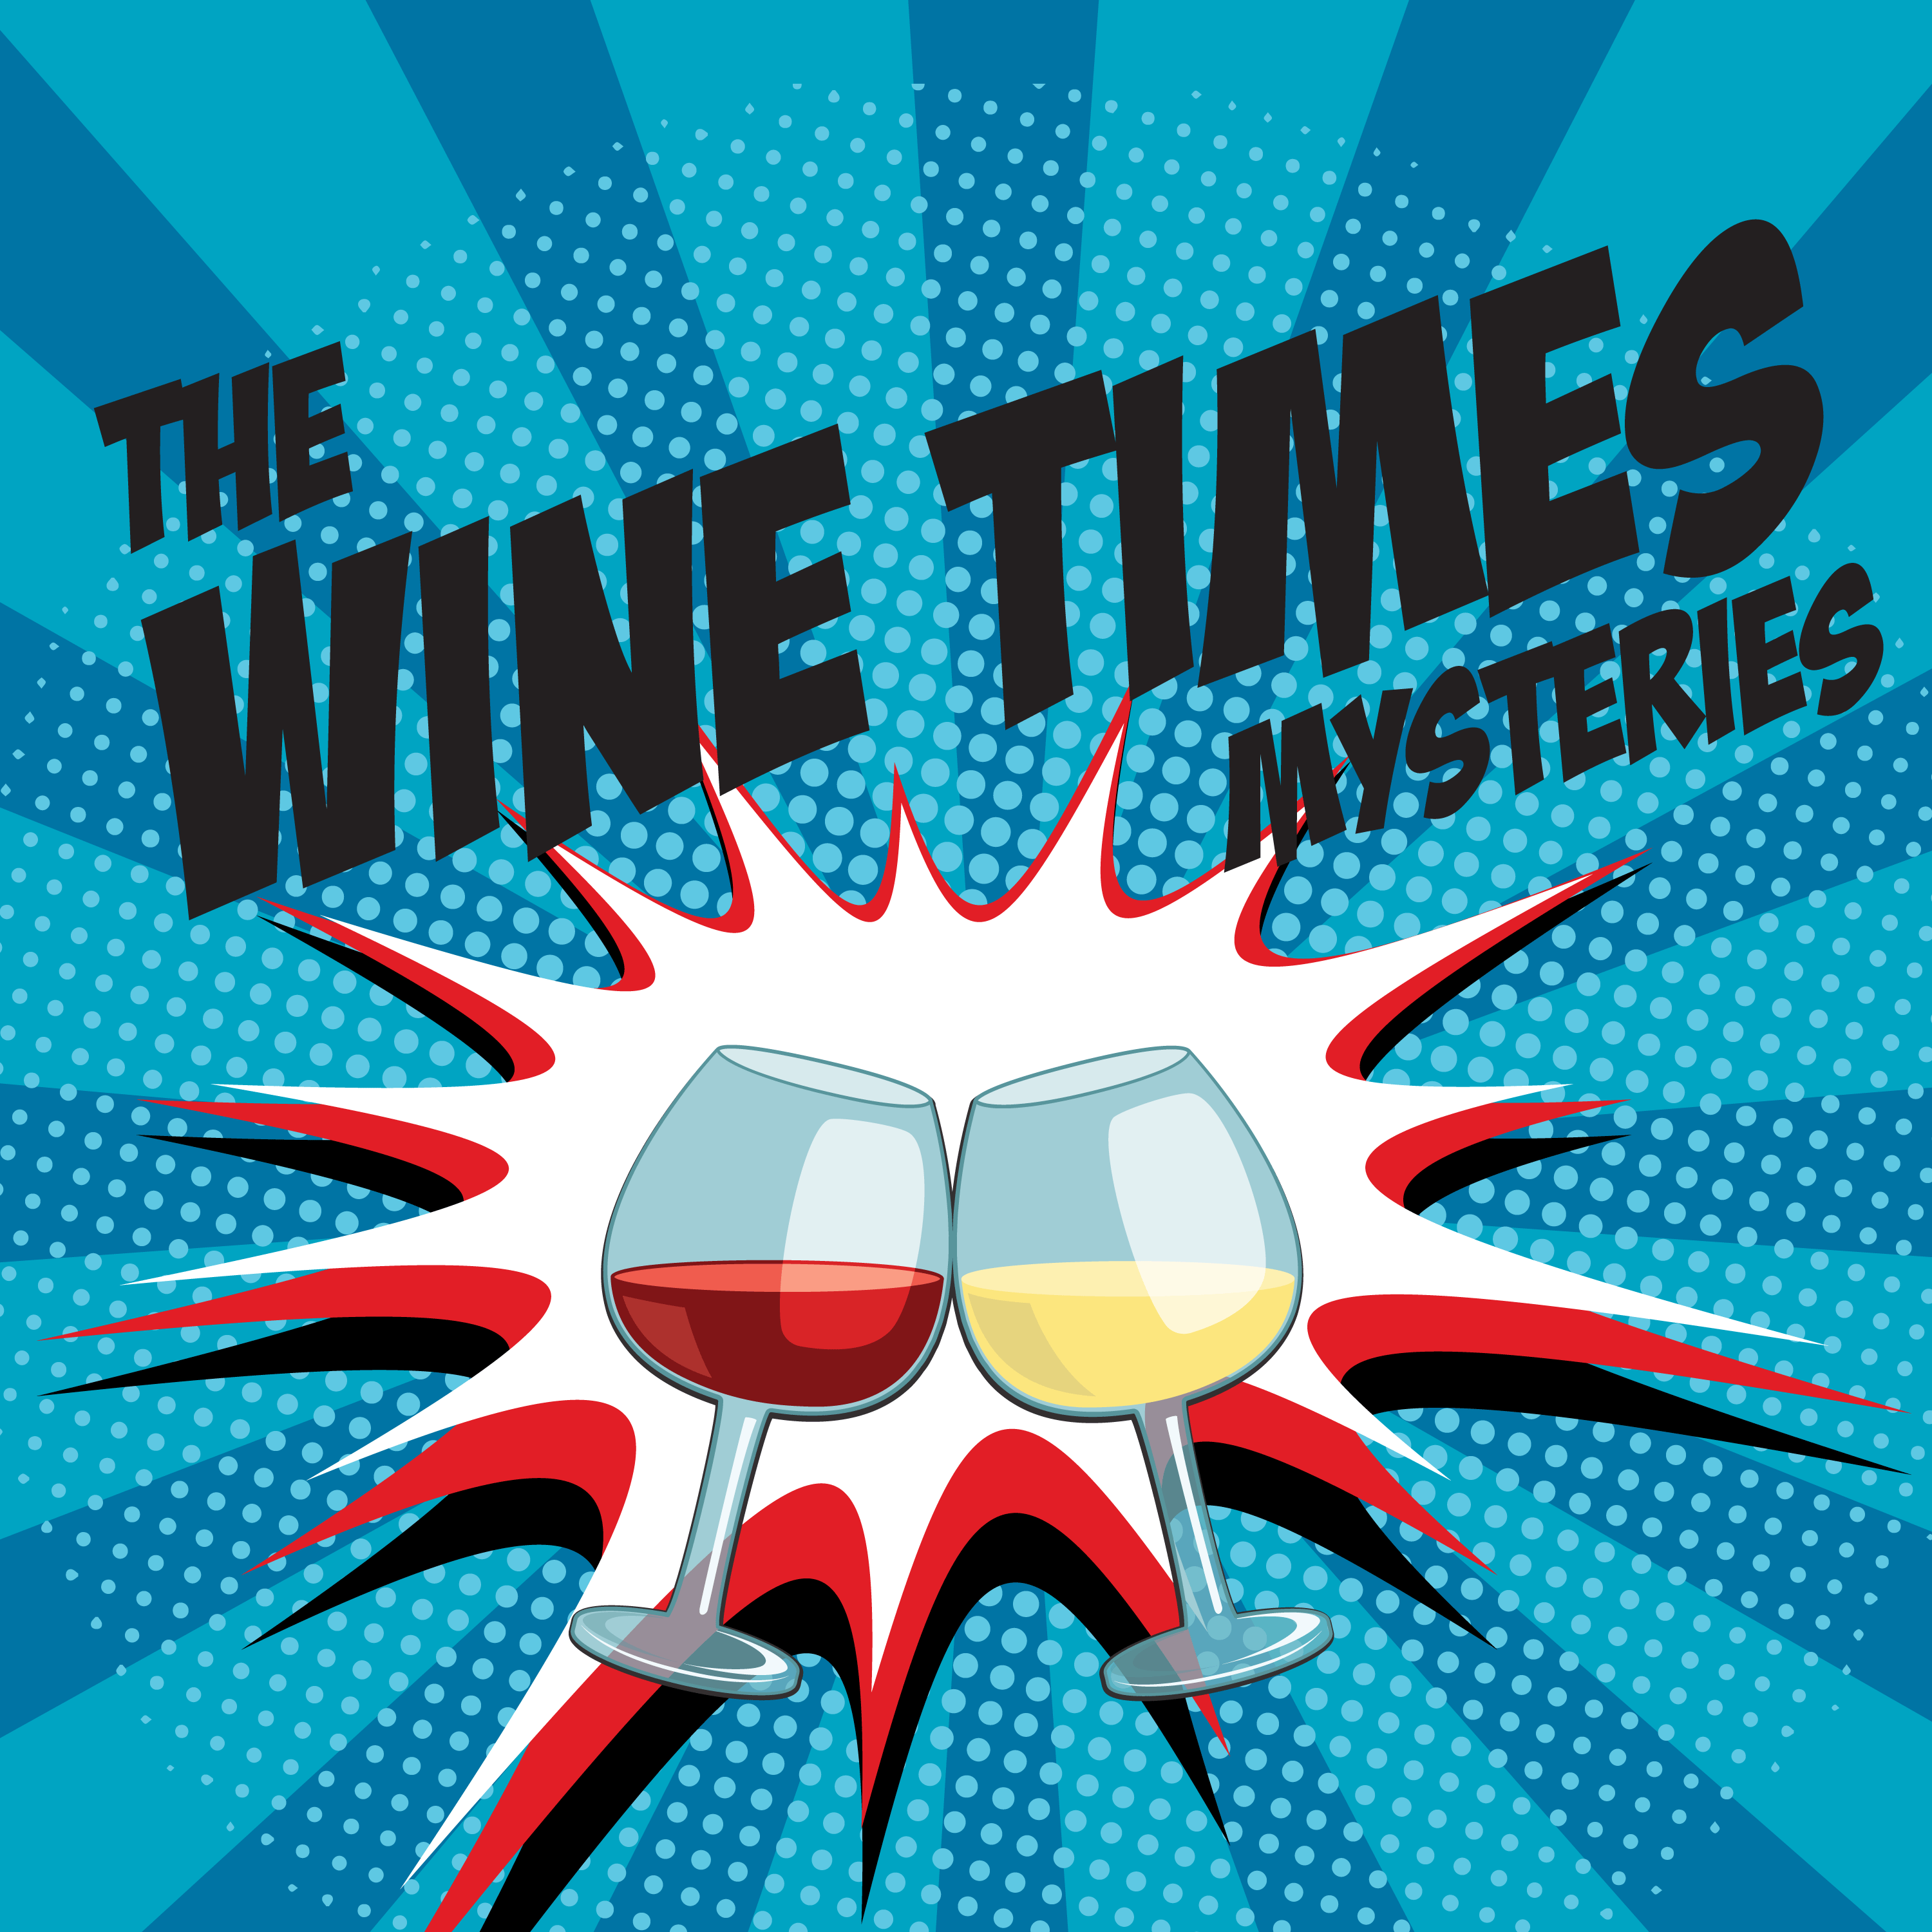 Show artwork for The Wine Times Mysteries